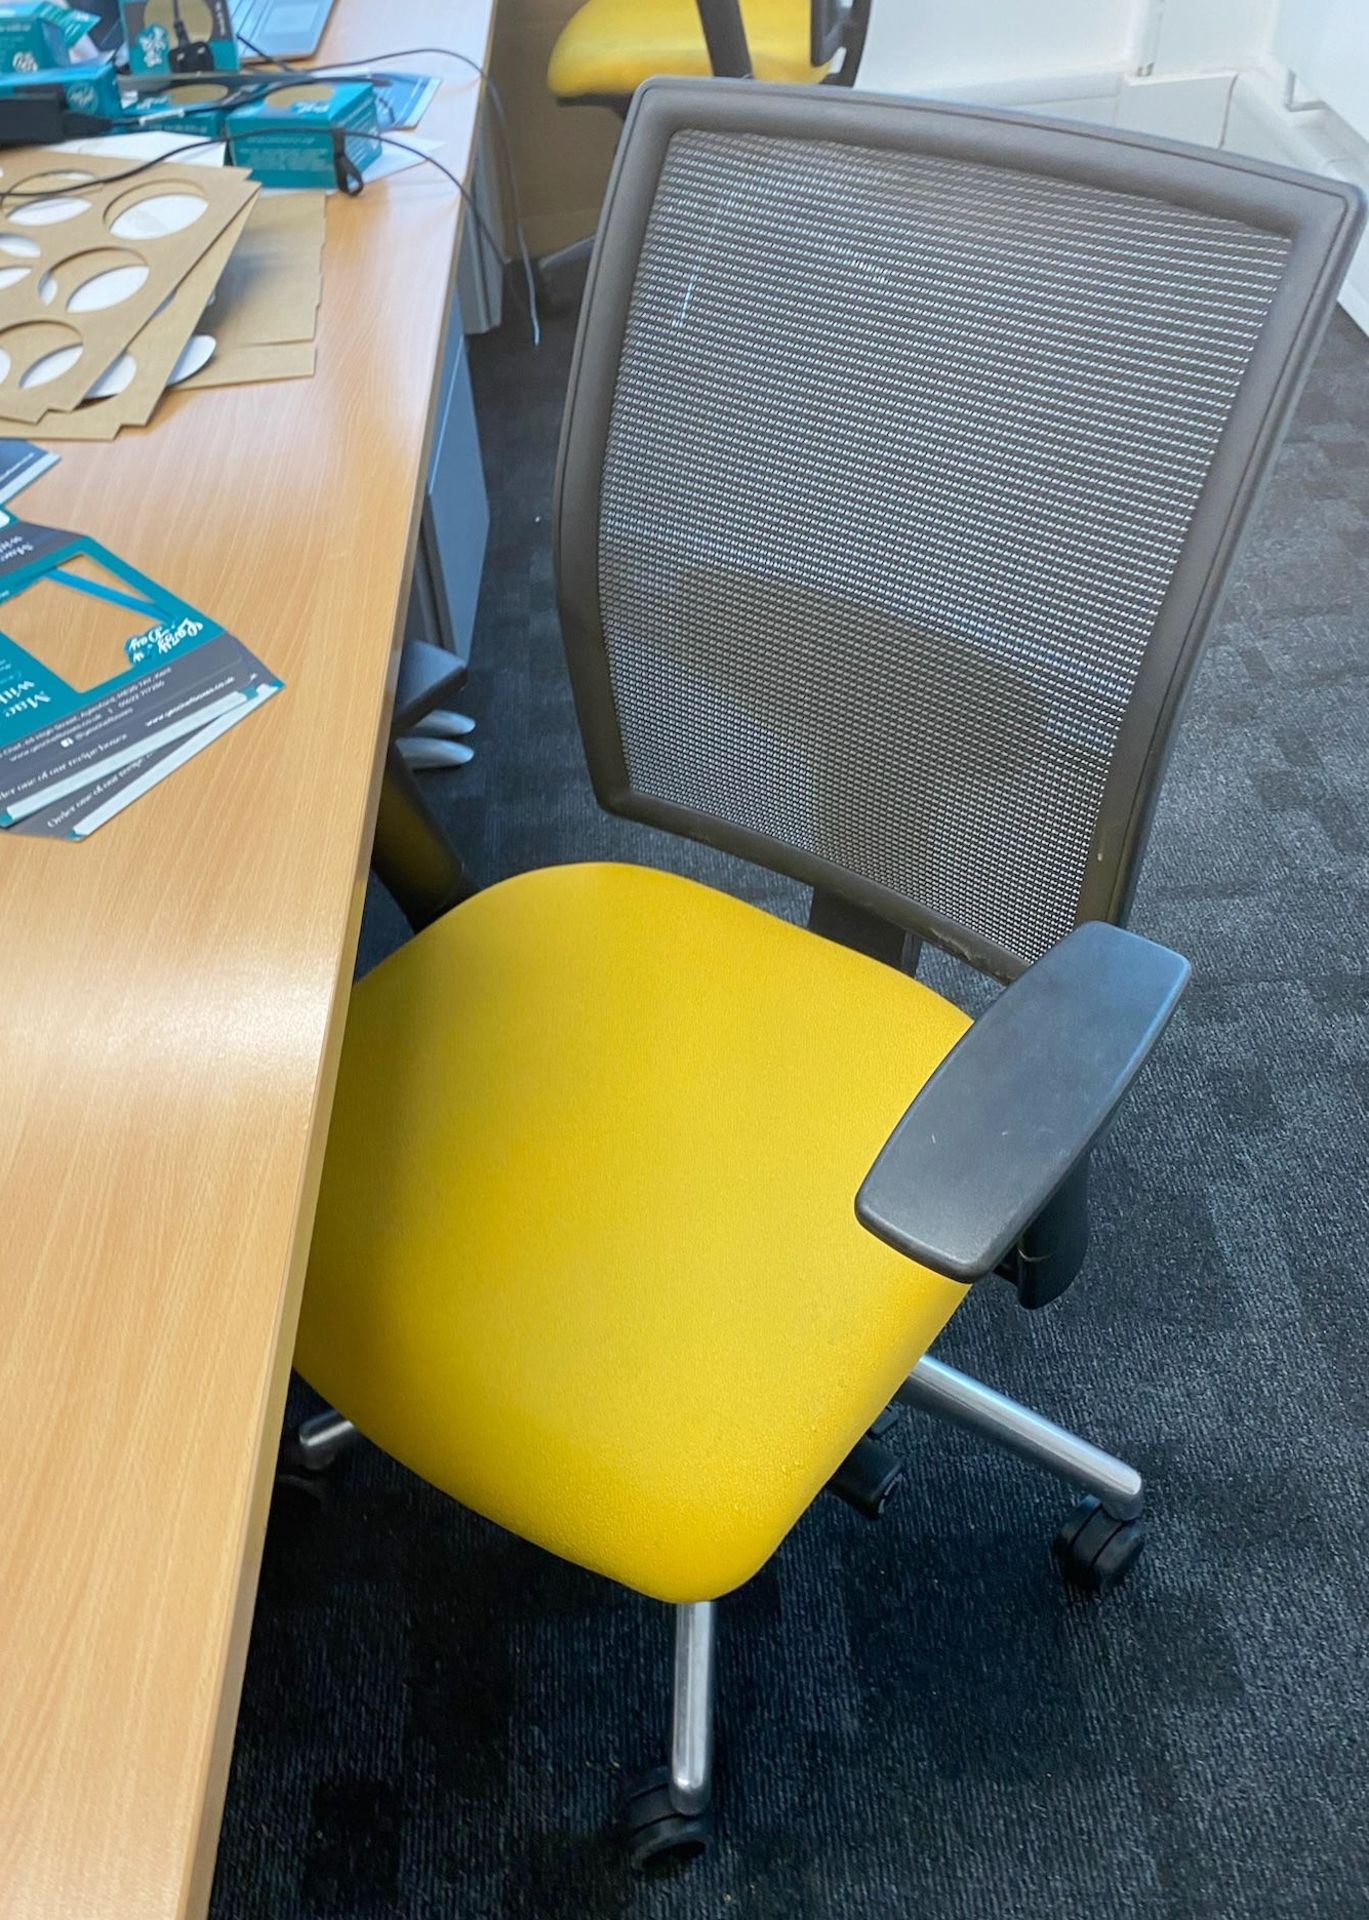 4 x Contemporary Beech Office Desks With Grey Pedestals and Yellow/Black Swivel Chairs - Image 3 of 4